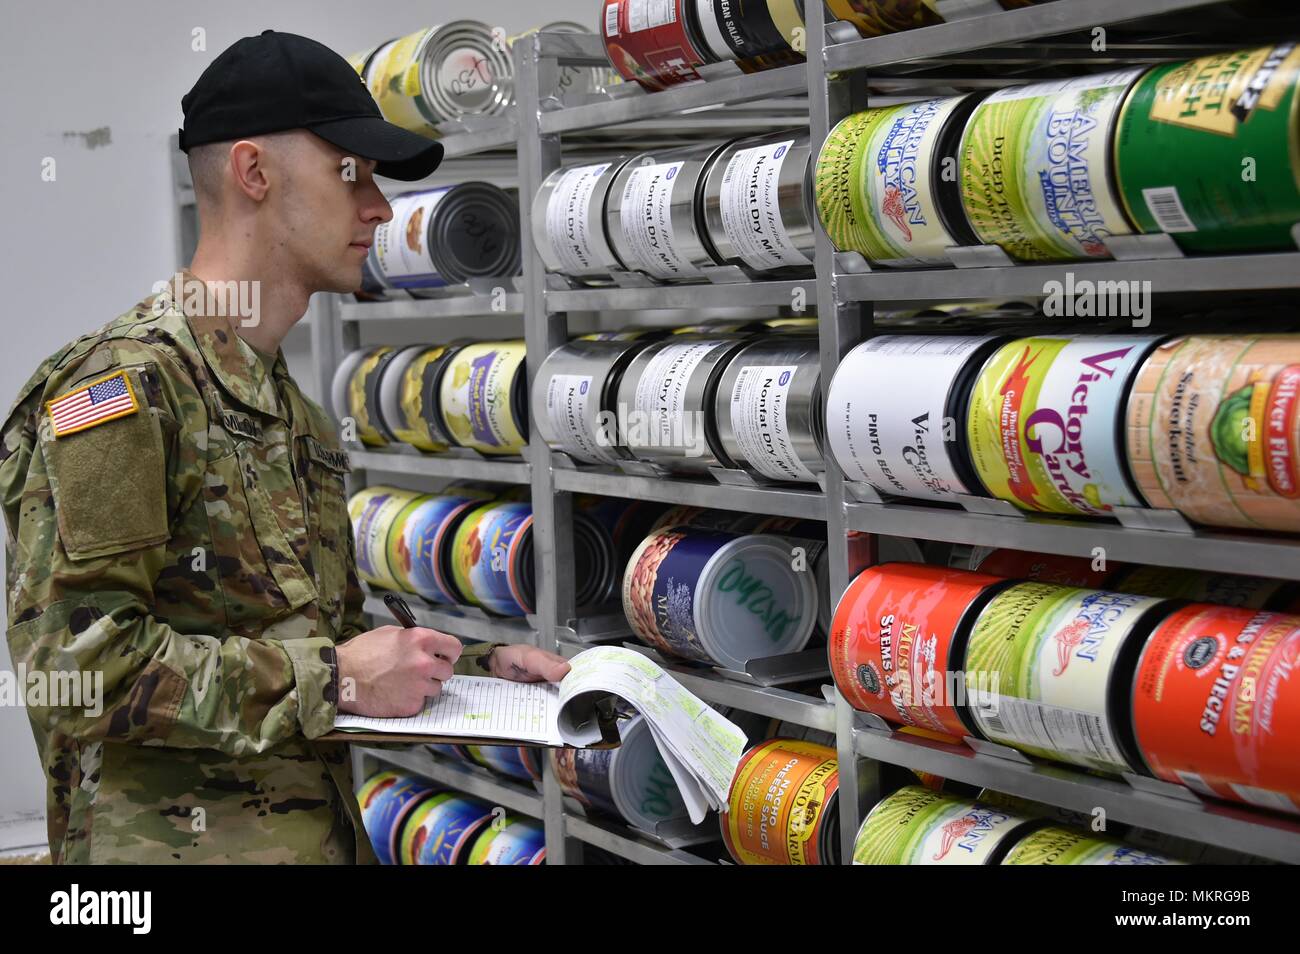 U.S. Army Spc, May 2, 2018. Dimitri Shumilov, a paratrooper with Fury Battery, 4th Battalion, 319th Airborne Field Artillery Regiment, 173rd Airborne Brigade, conducts an inventory in a supply depot at the Tower Barracks Dining Facility, Grafenwoehr, Germany, May 2, 2018. (U.S. Army photo by Gertrud Zach). () Stock Photo